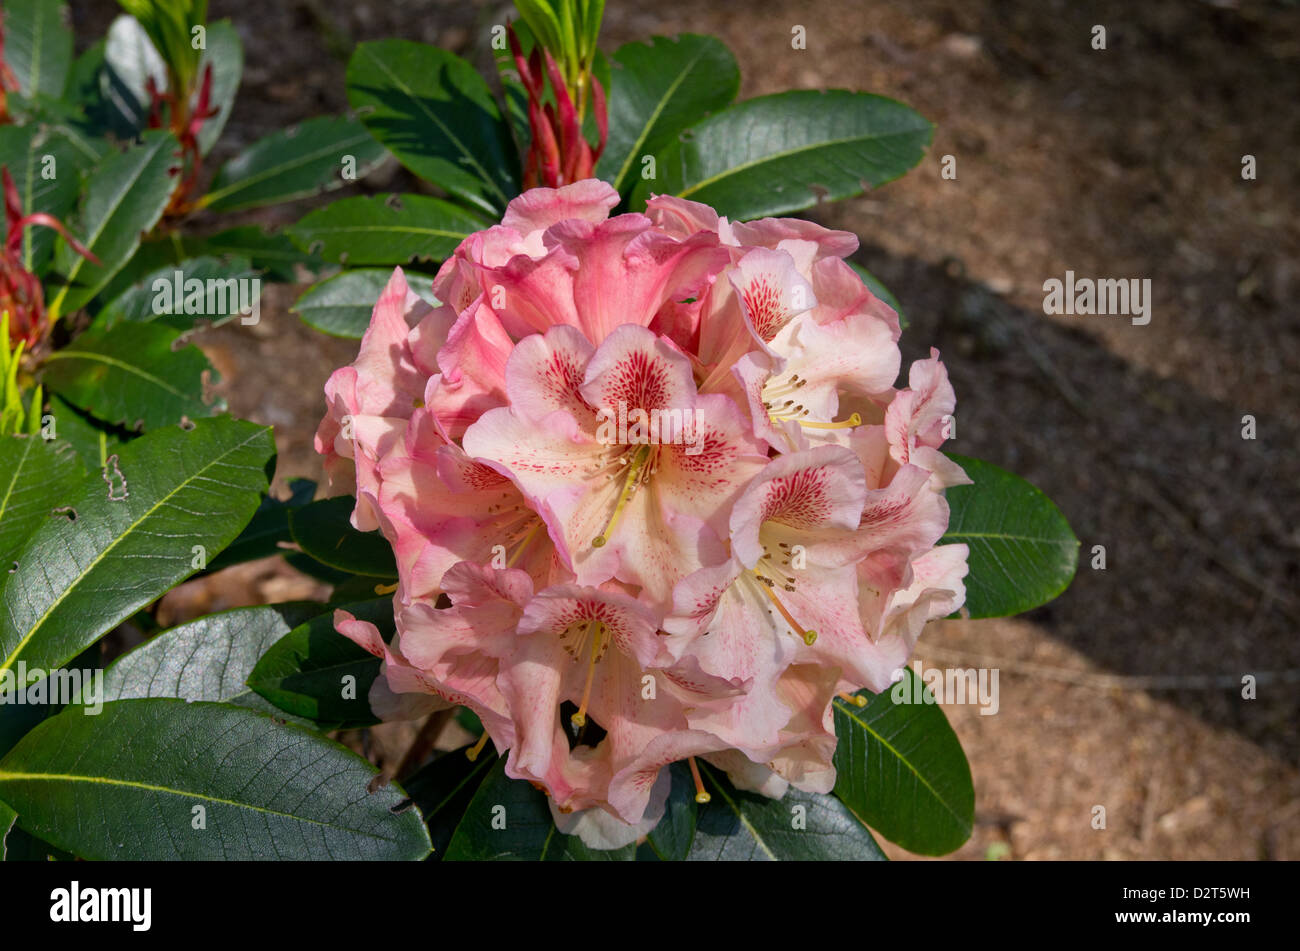 Rhododendron Wind River flower Stock Photo